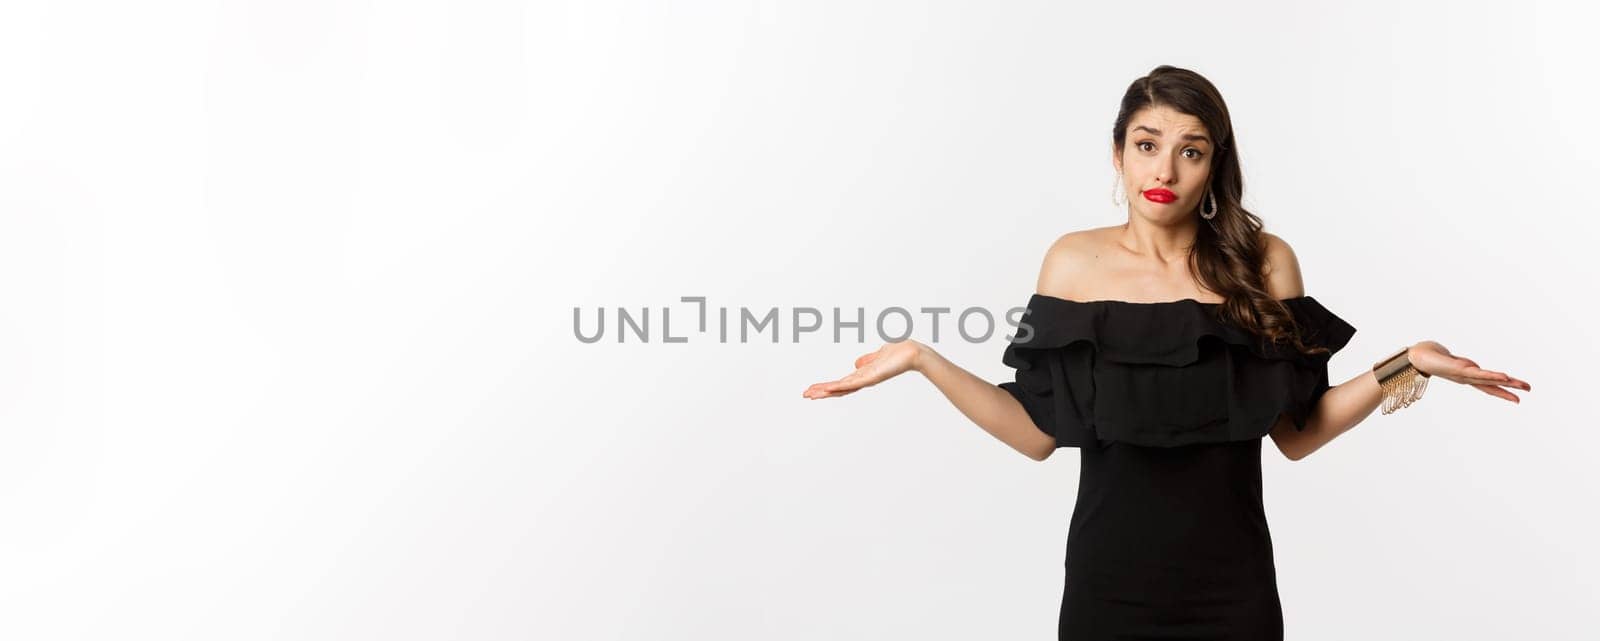 Fashion and beauty. Clueless attractive woman in black dress dont know, shrugging and smirking unaware, standing indecisive over white background.